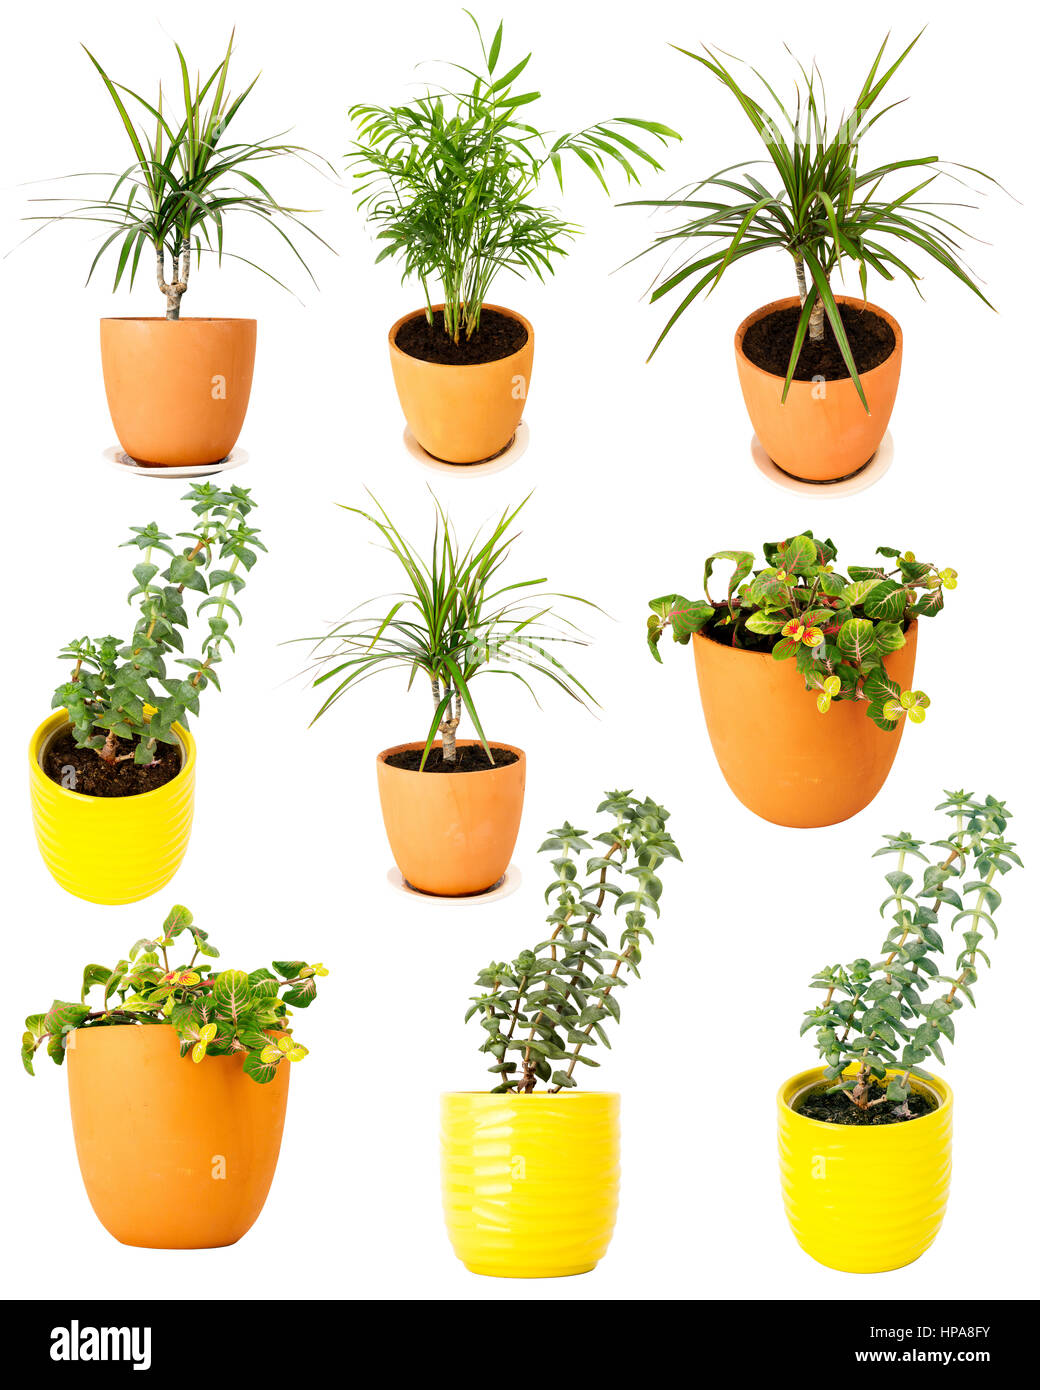 Collection of various potted plants isolated on white background Stock Photo